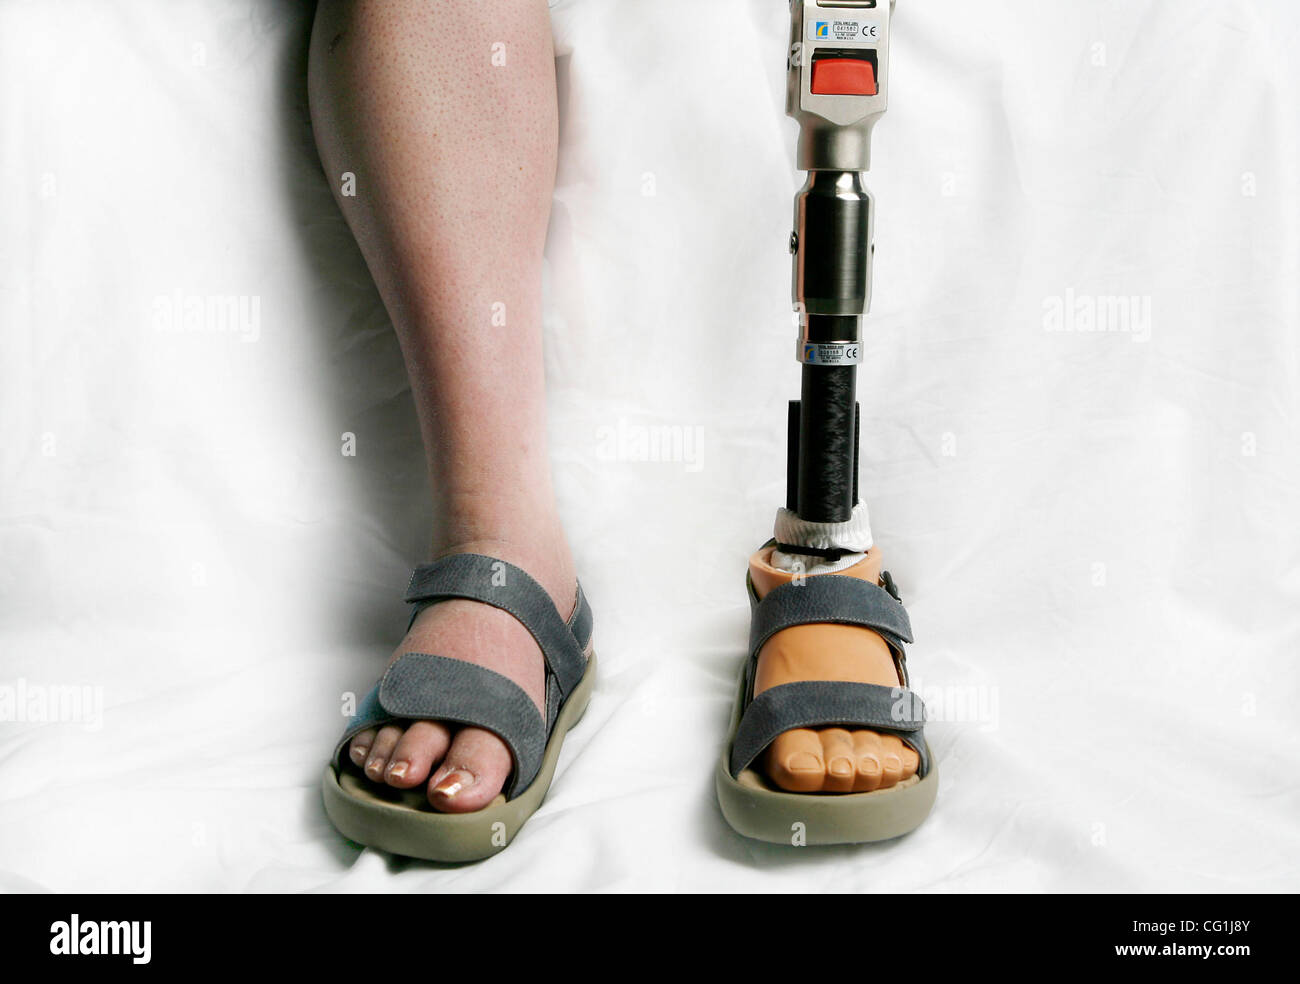 Aug 17, 2007 - Lake Worth, FL, USA - Closeup of leg amputee - this is Elissa Wehner who suffers from Diabetes. (Credit Image: © J. Gwendolynne Berry/Palm Beach Post/ZUMA Press) RESTRICTIONS: USA Tabloid RIGHTS OUT! Stock Photo